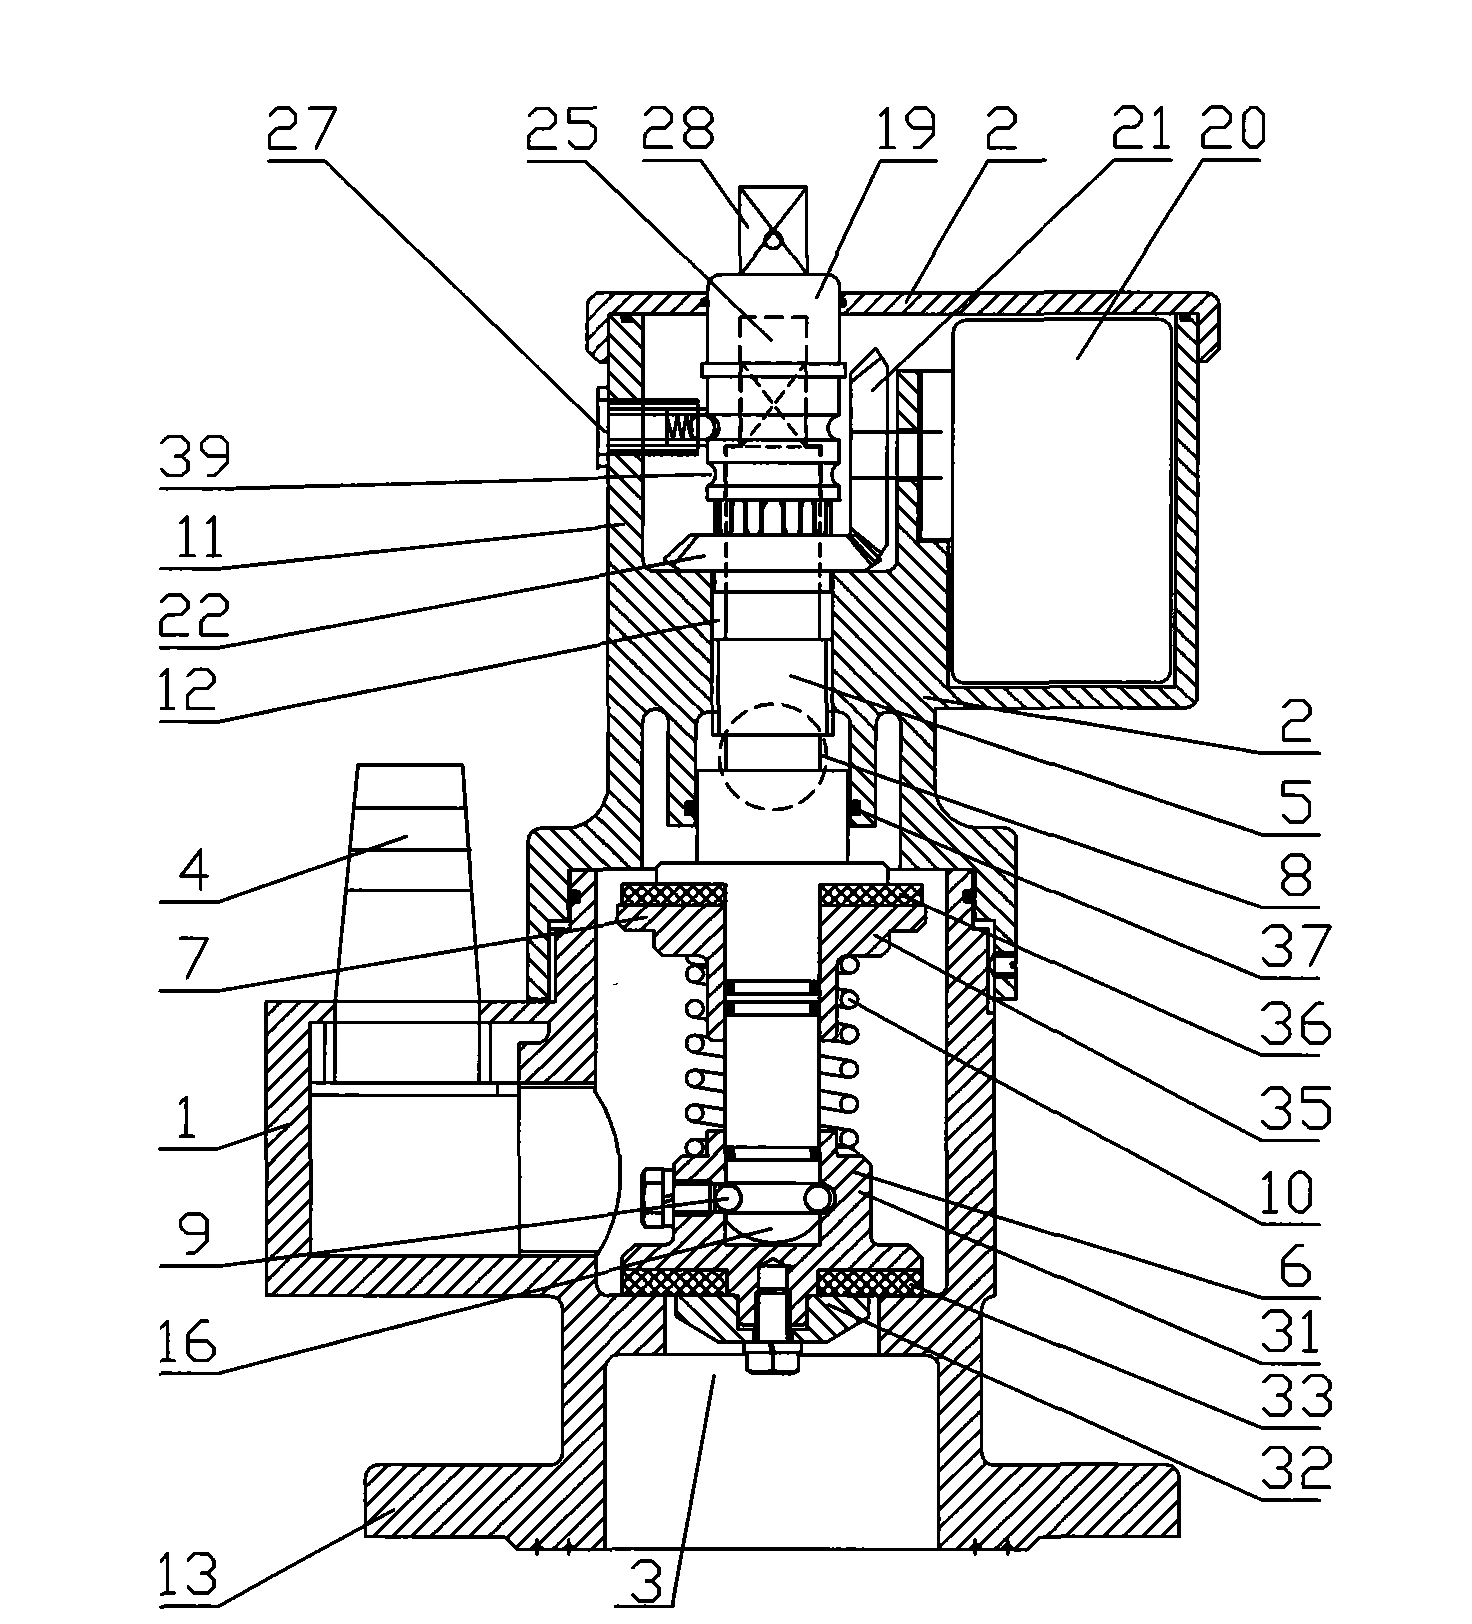 Manual and automatic integrated passenger train water-feeding valve